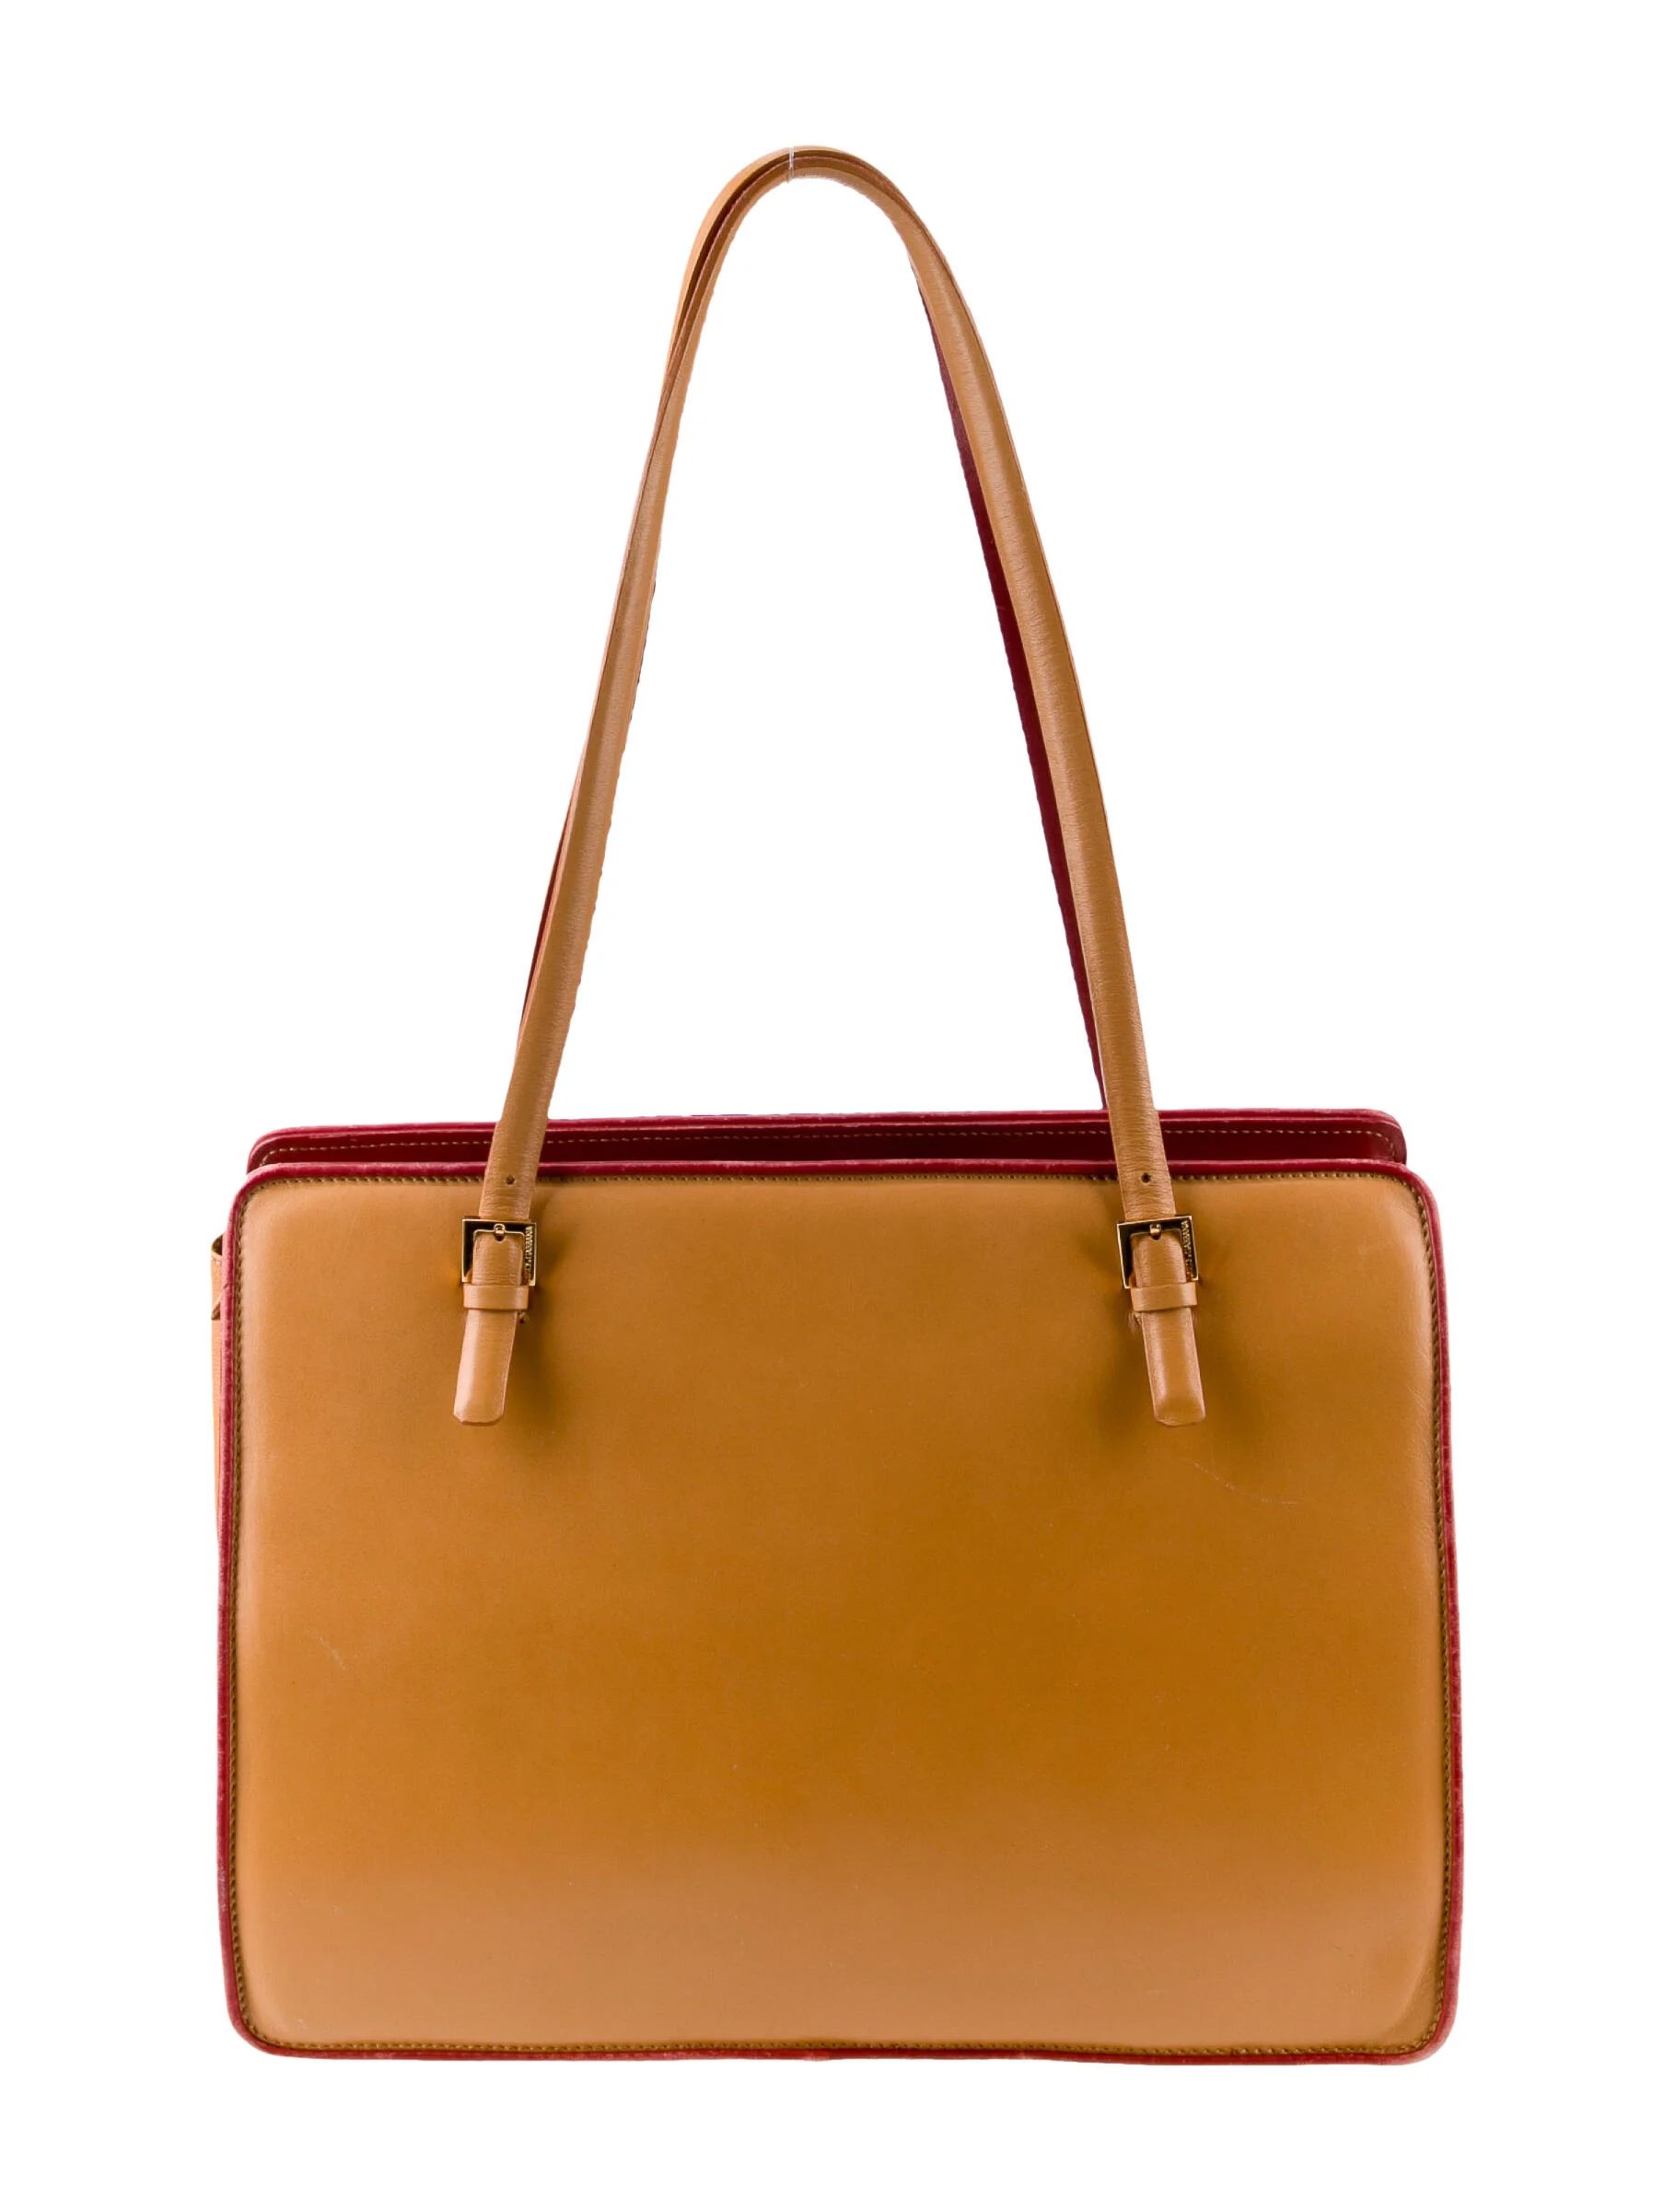 Vintage Leather Tote | The RealReal